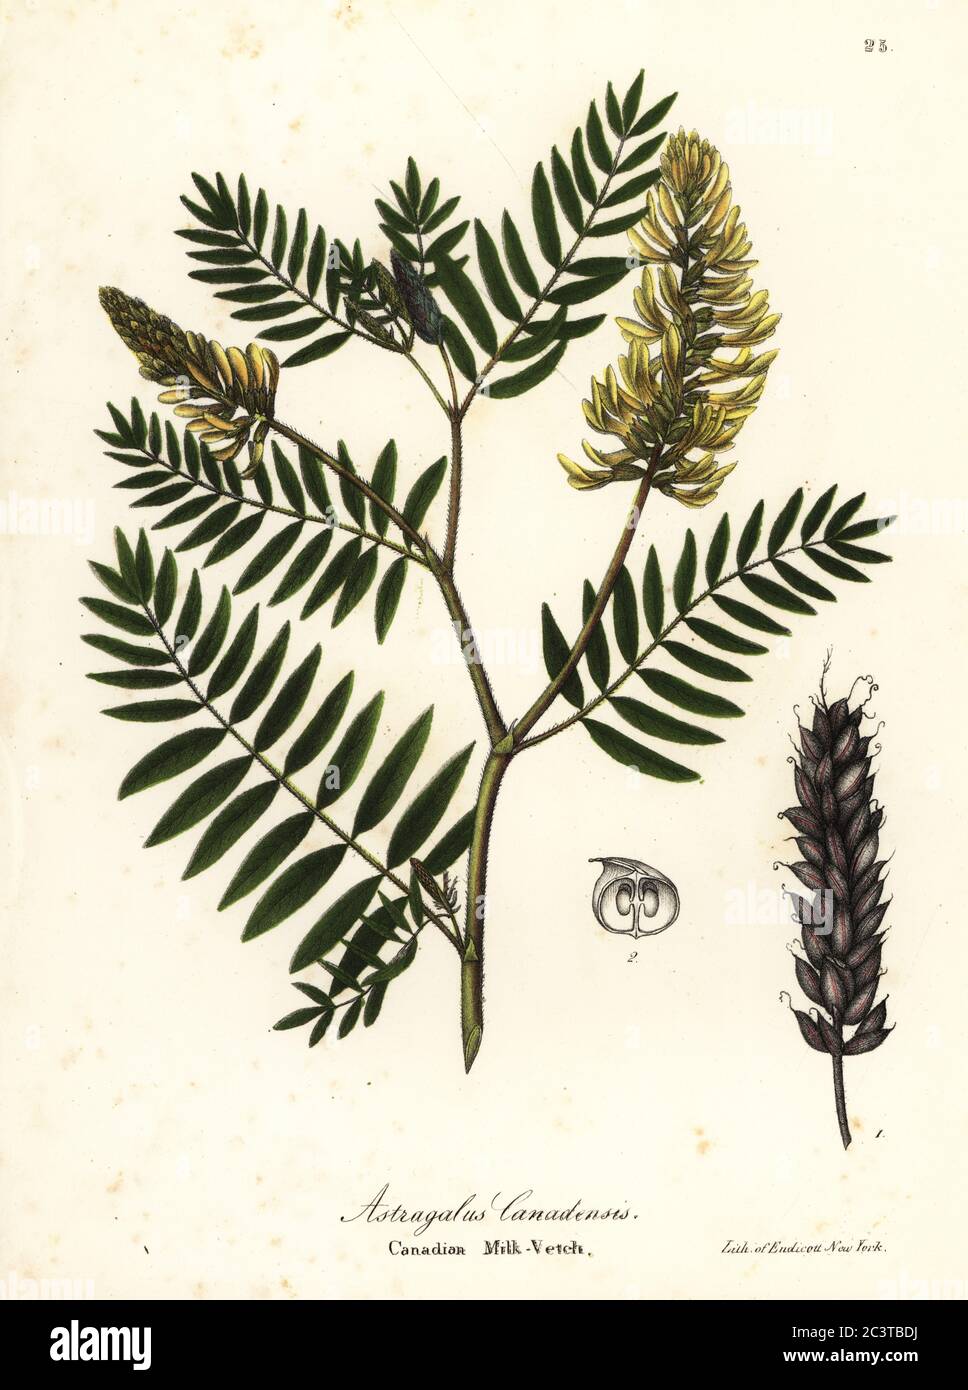 Canadian milk-vetch, Astragalus canadensis. Handcoloured lithograph by Endicott after a botanical illustration from John Torrey’s A Flora of the State of New York, Carroll and Cook, Albany, 1843. The plates drawn by John Torrey, Agnes Mitchell, Elizabeth Paoley and Swinton. John Torrey was an American botanist, chemist and physician 1796-1873. Stock Photo